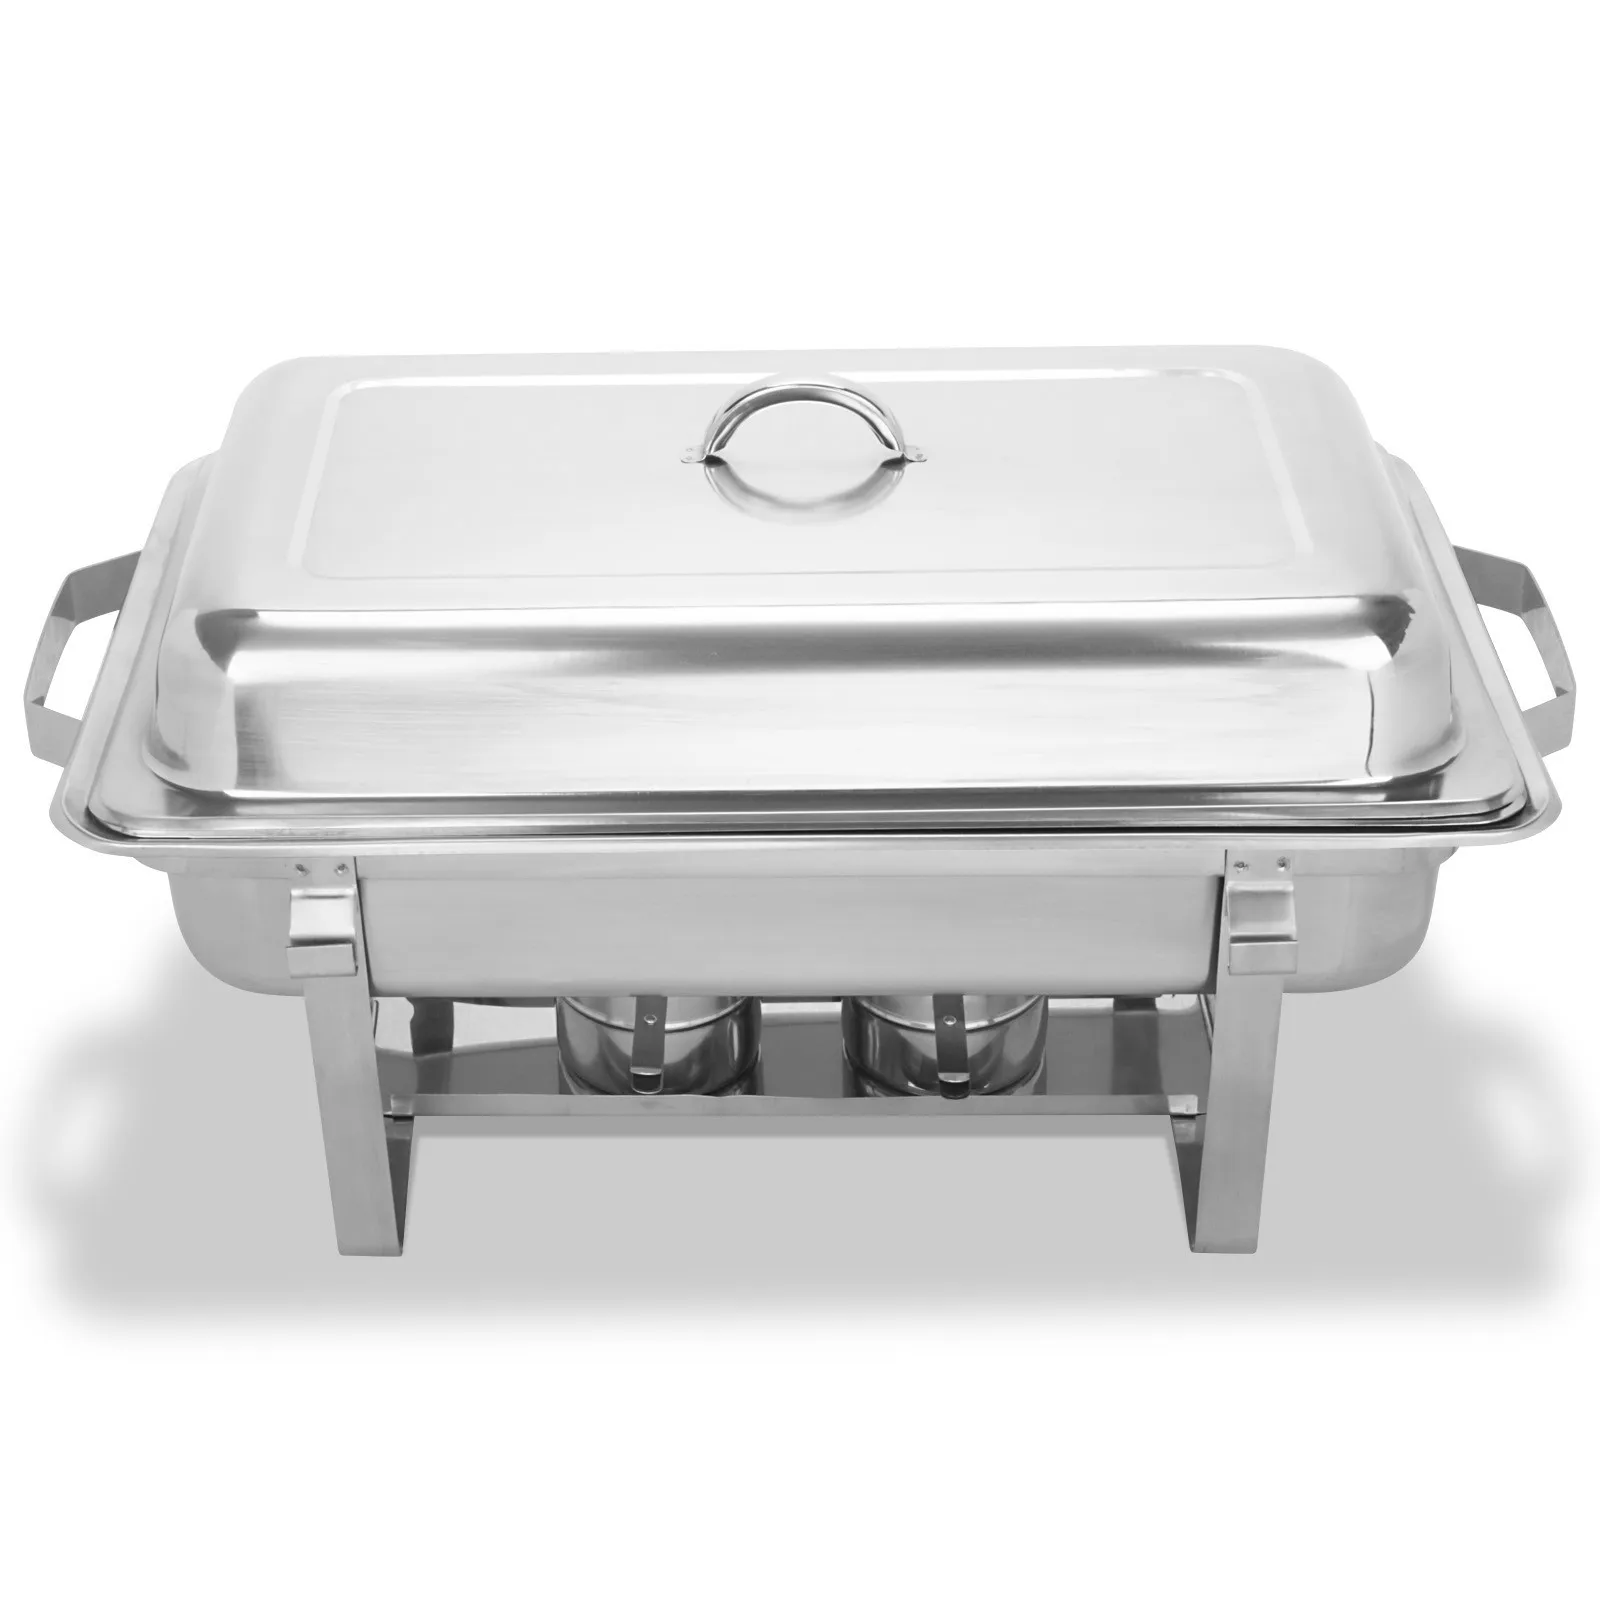 4 Pack Chafing Dish Sets Buffet Catering Stainless Steel W/Tray Folding Chafer 